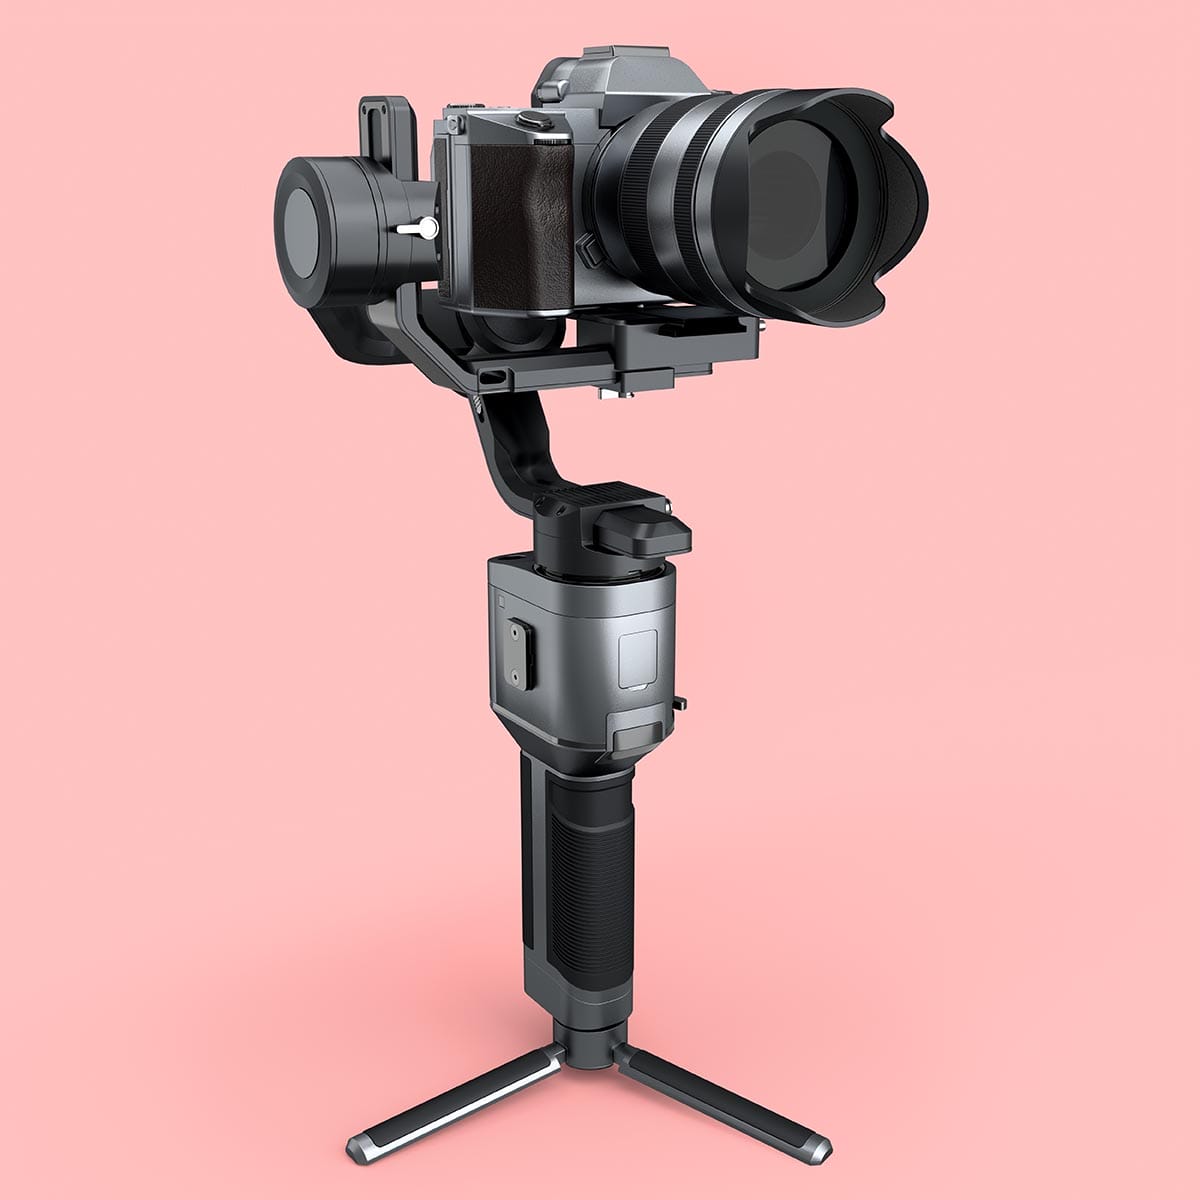 3-axis gimbal stabilization system with silver nonexistent mirrorless camera isolated on pink background. 3D rendering and illustration of professional photography equipment for streaming